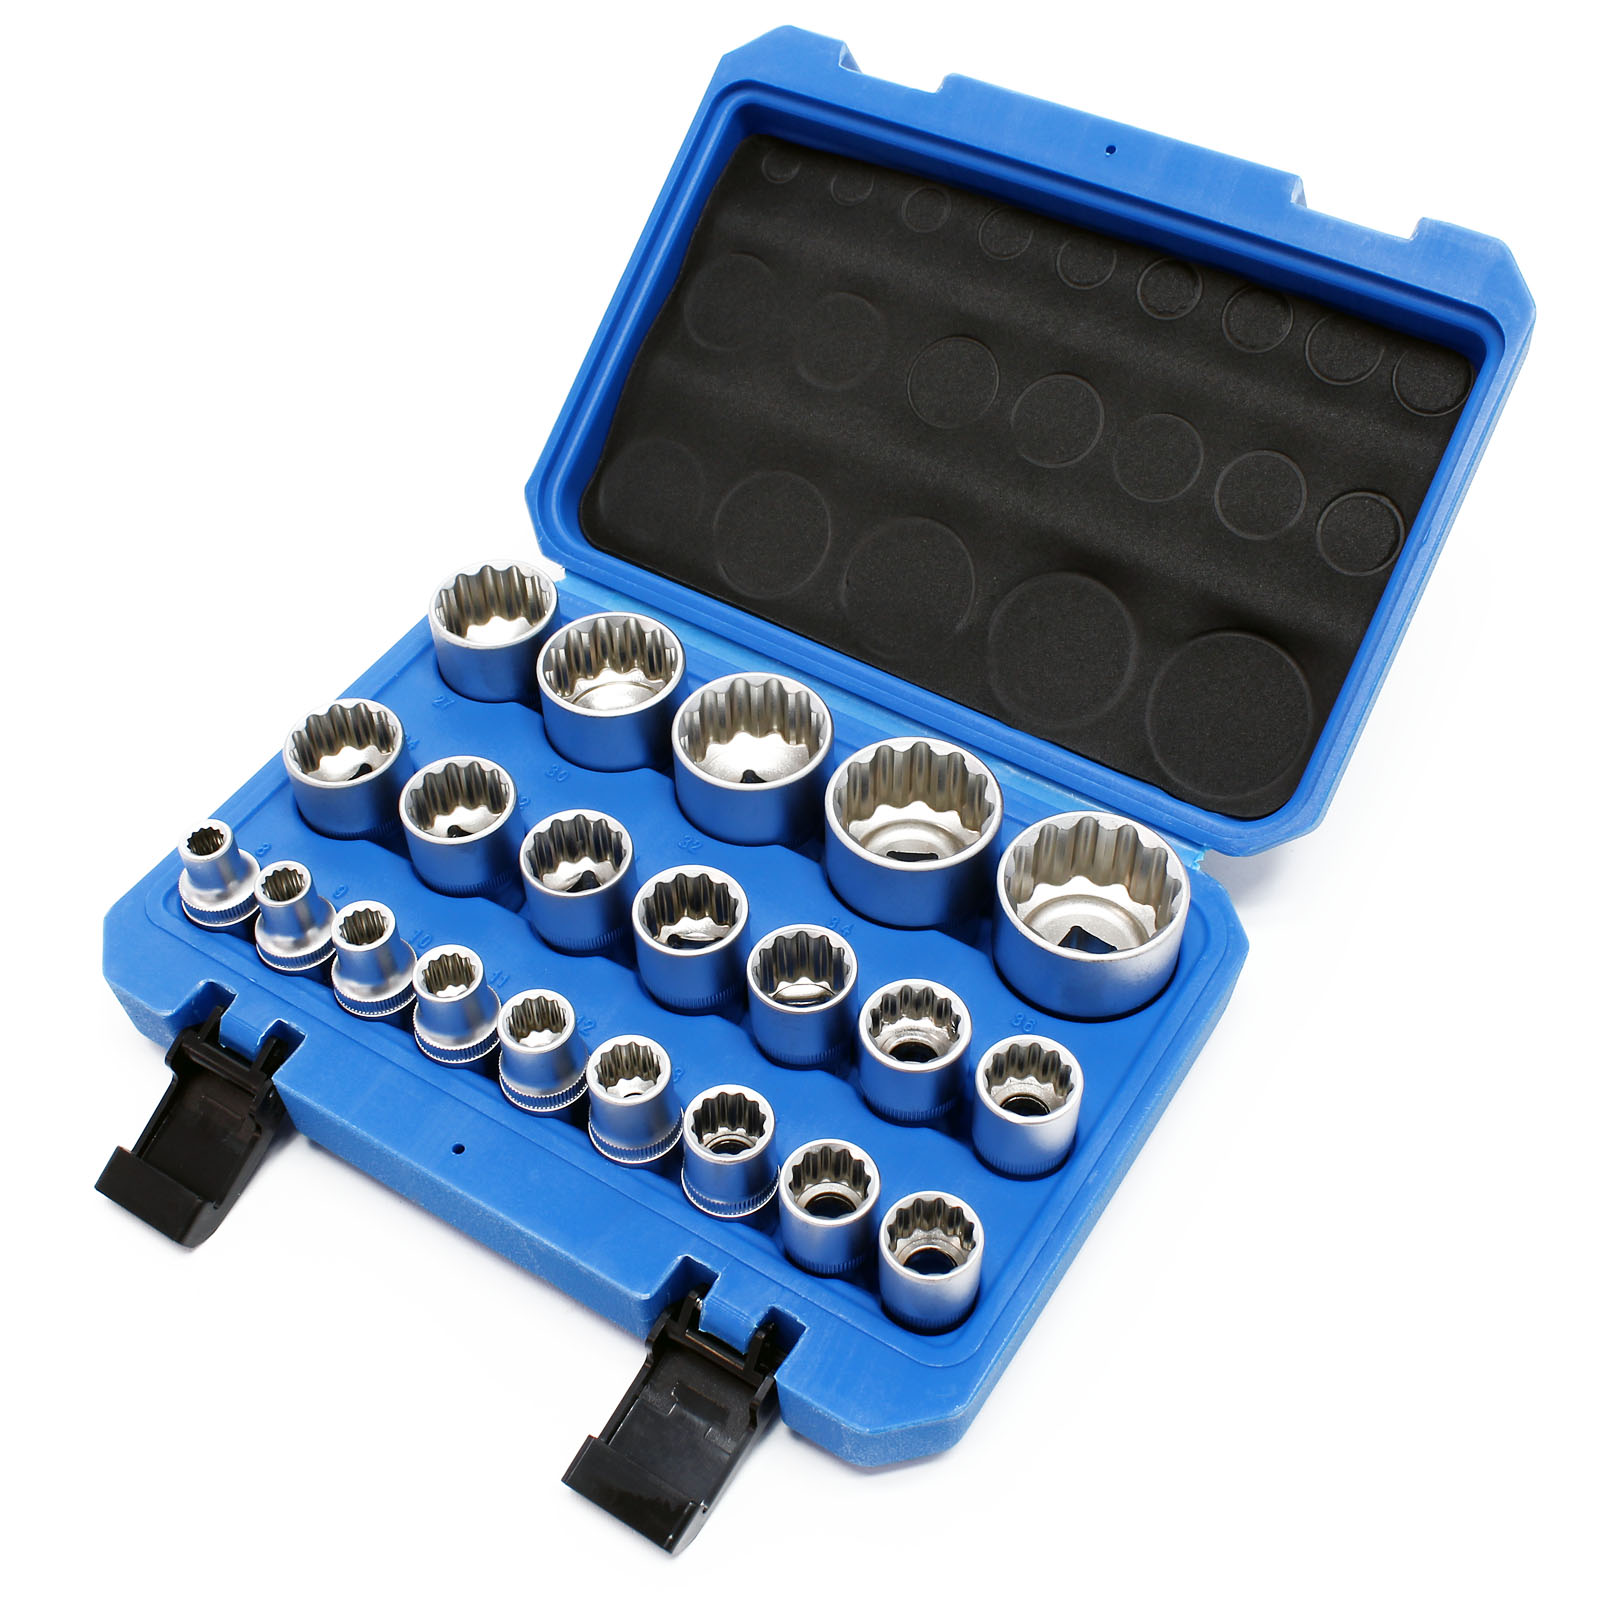 DOUBLE HEX SOCKET SET 8-36MM 1/2'' - ASTA - SOCKET WRENCHES